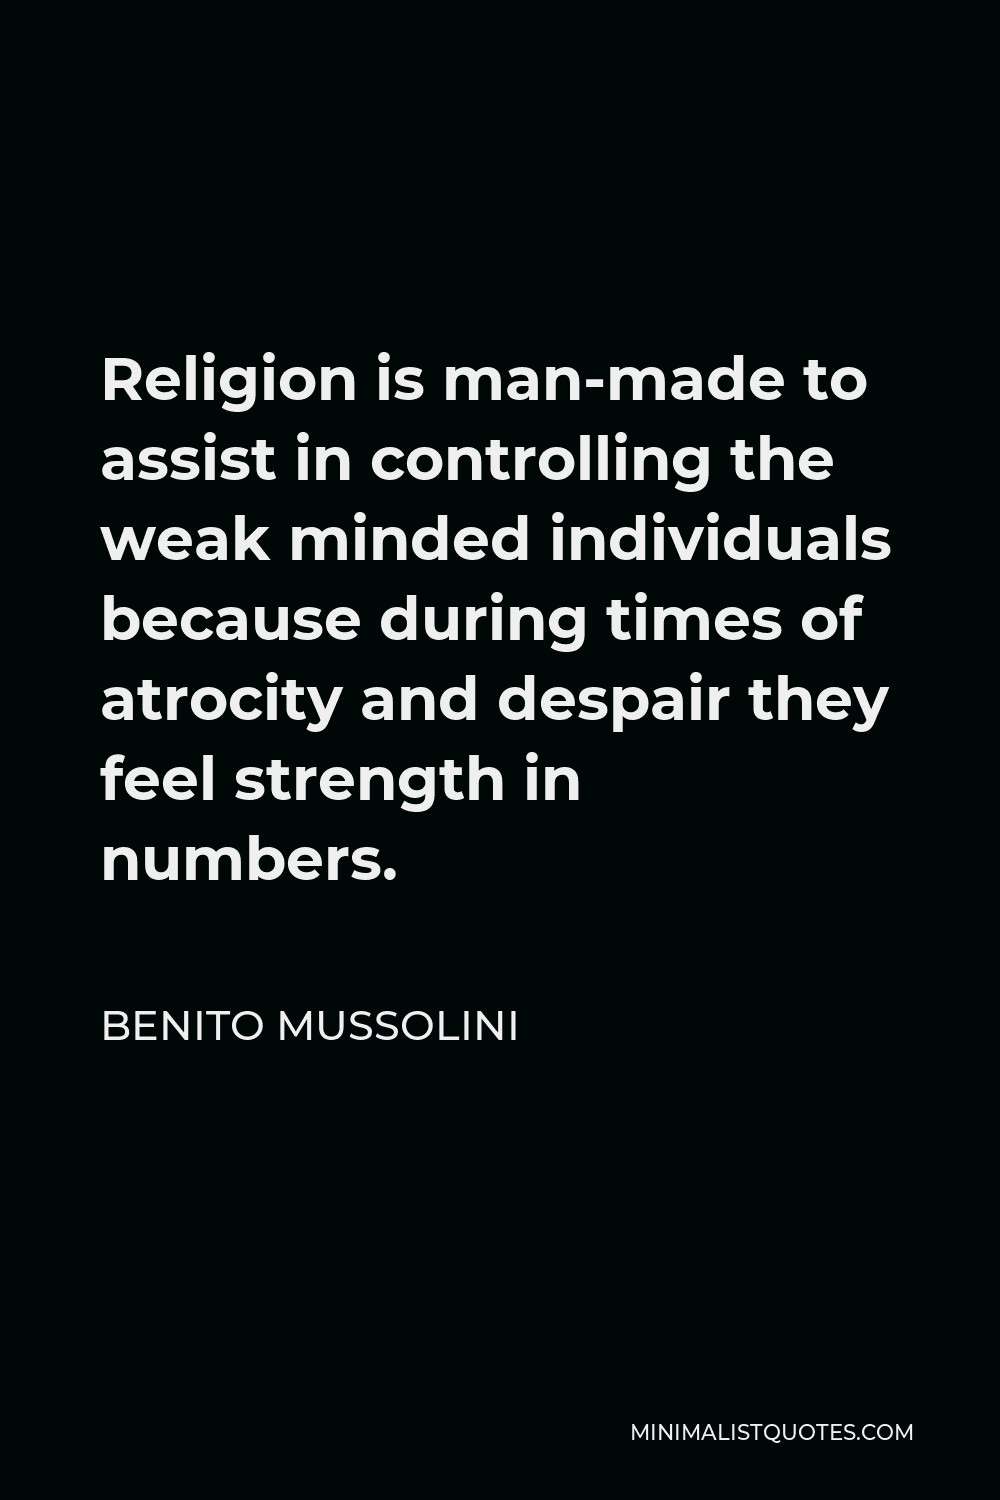 Benito Mussolini Quote - Religion is man-made to assist in controlling the weak minded individuals because during times of atrocity and despair they feel strength in numbers.